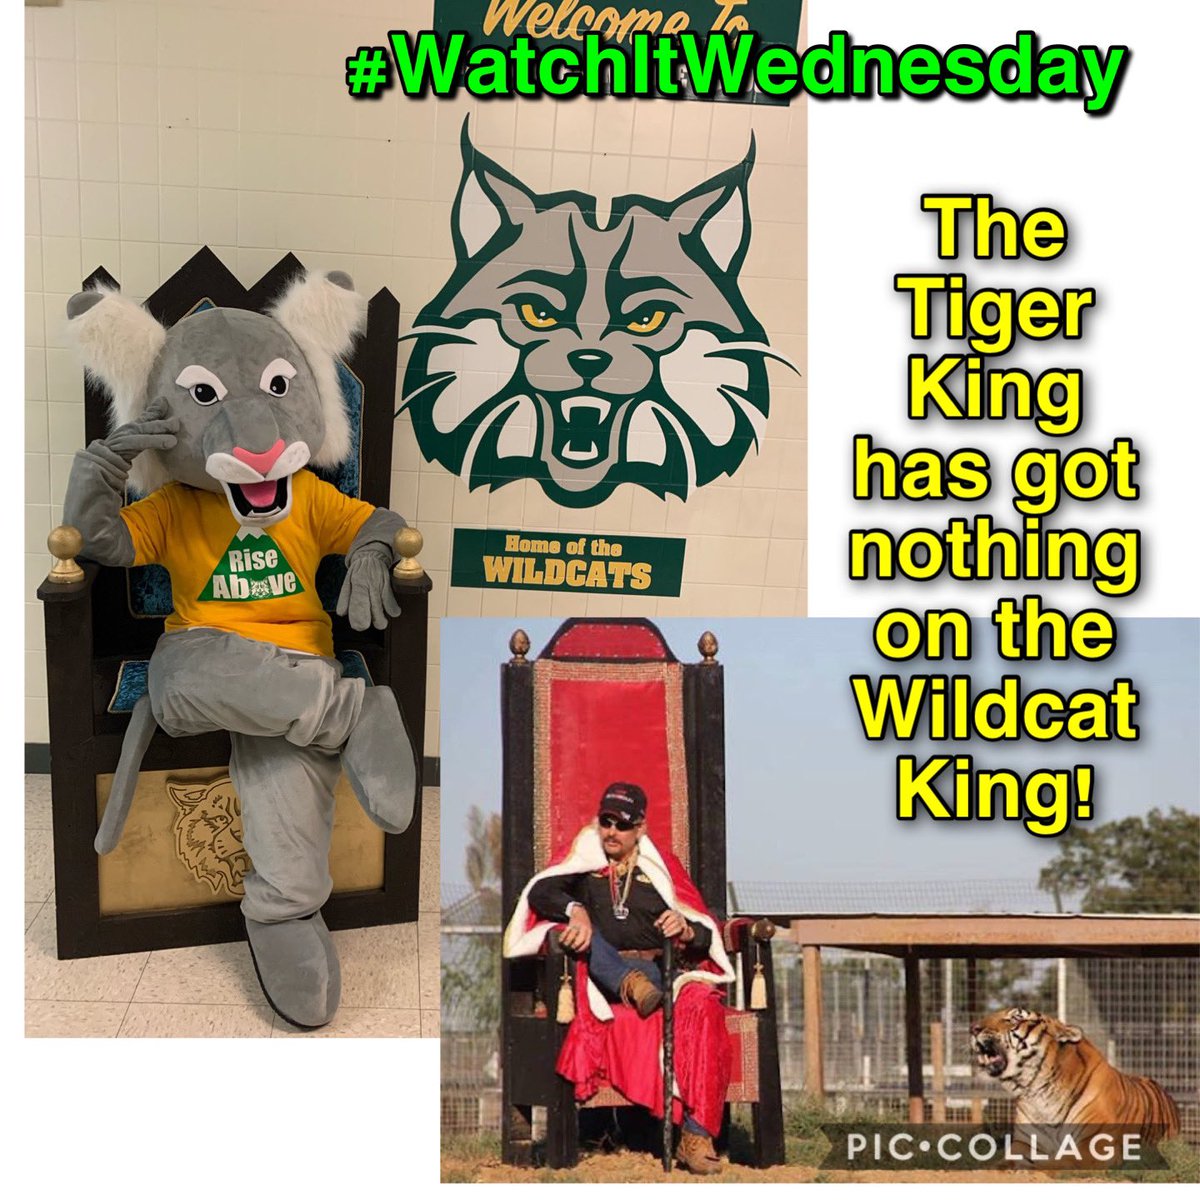 Today for the IT Virtual Spirit Week: #WatchItWwdnesday. What show are you currently binging? Take a selfie in front of the TV! Make sure you include the tag #WatchItWednesday, or send pictures to Mr. Luebbing mluebbing@psd202.org and they will be posted later today!